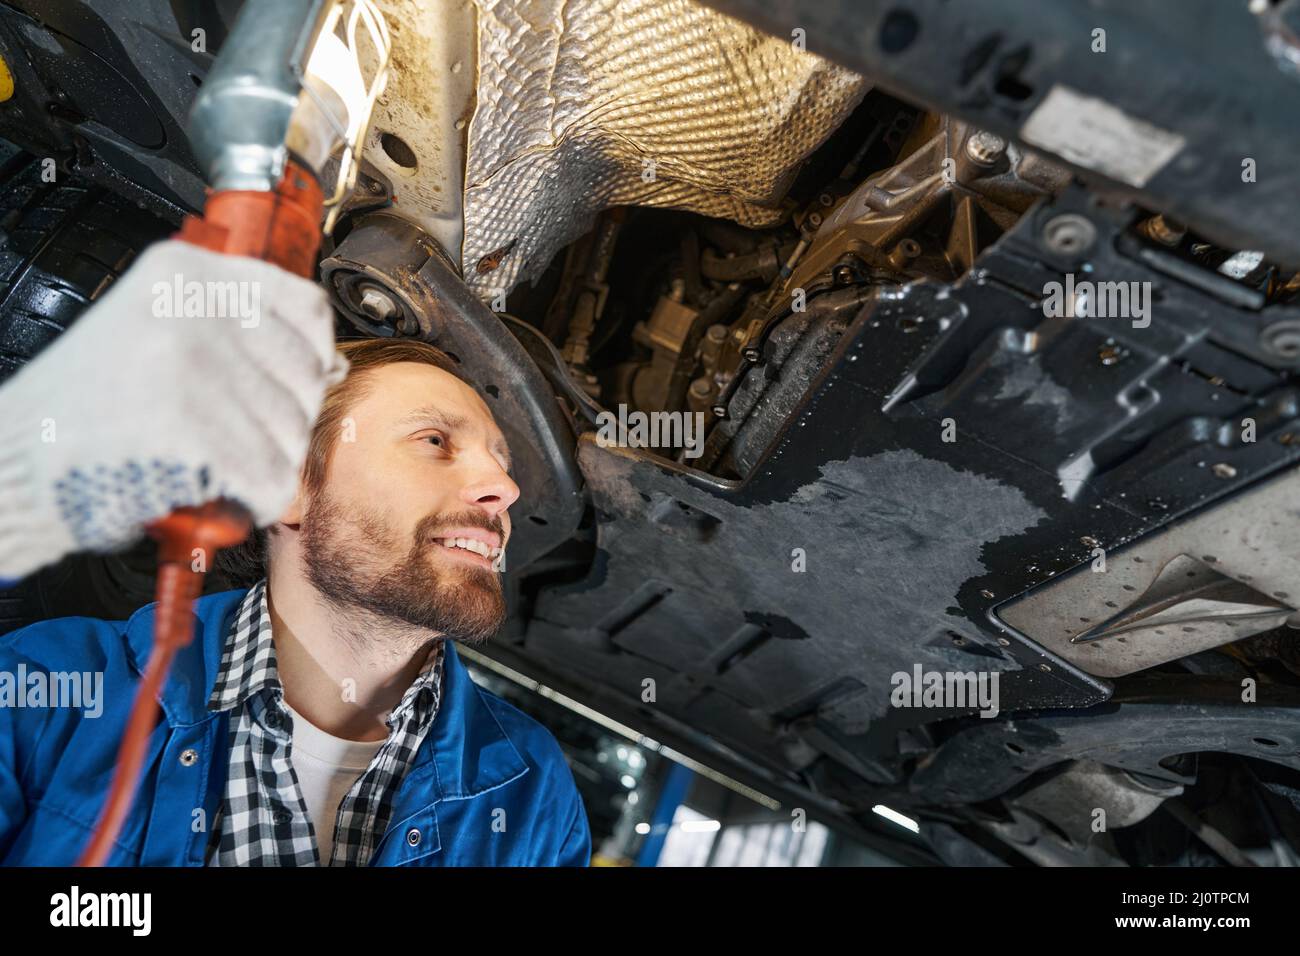 The Car Mechanic Unscrews The Diesel Filter Next To The Oil Pan With A  Metal Wrench Visible Man Hands Stock Photo - Download Image Now - iStock